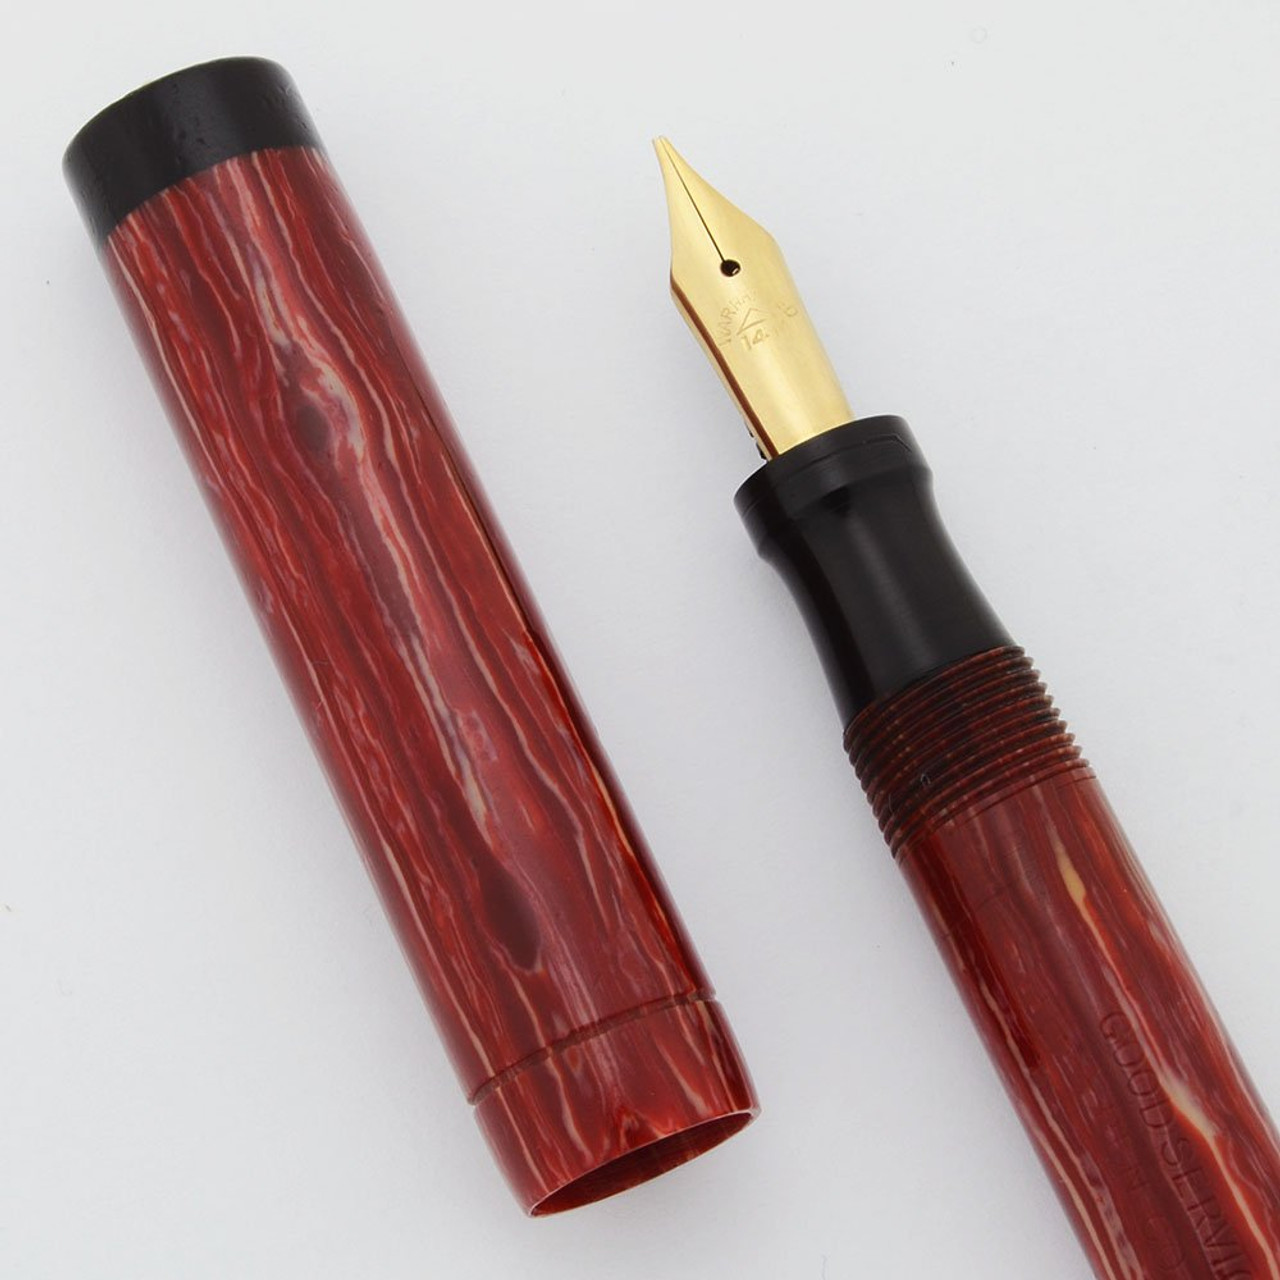 Good Service (Sears Roebuck) Fountain Pen - Ring Top, Red w Black Bands, 14k Flexible Nib (Excellent, Restored)